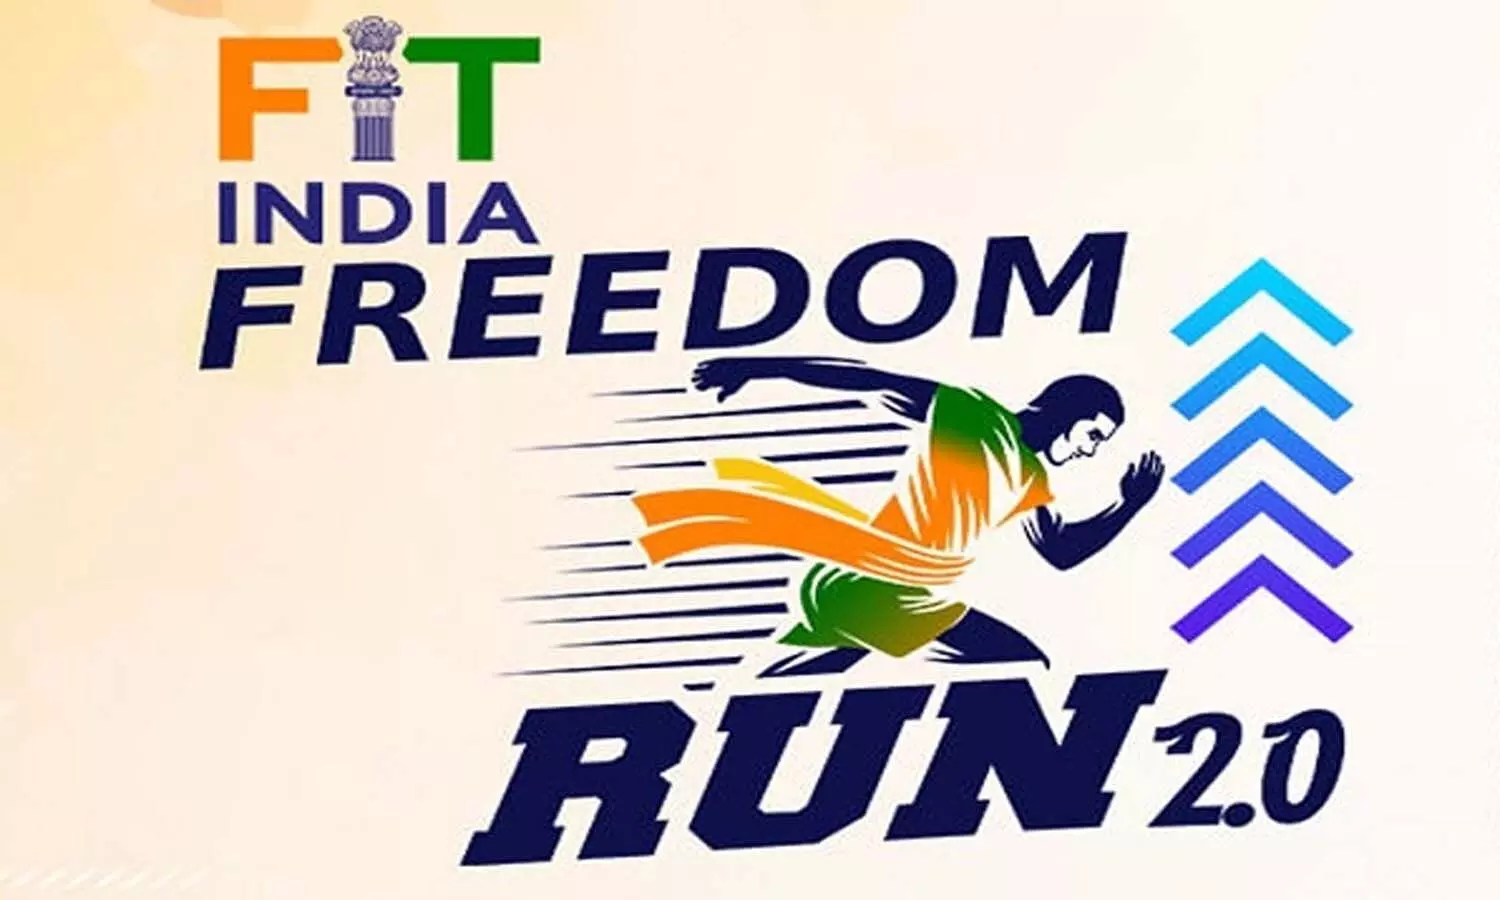 Nationwide program of Fit India Freedom Run 2.0, Sports Minister will launch on 13th August